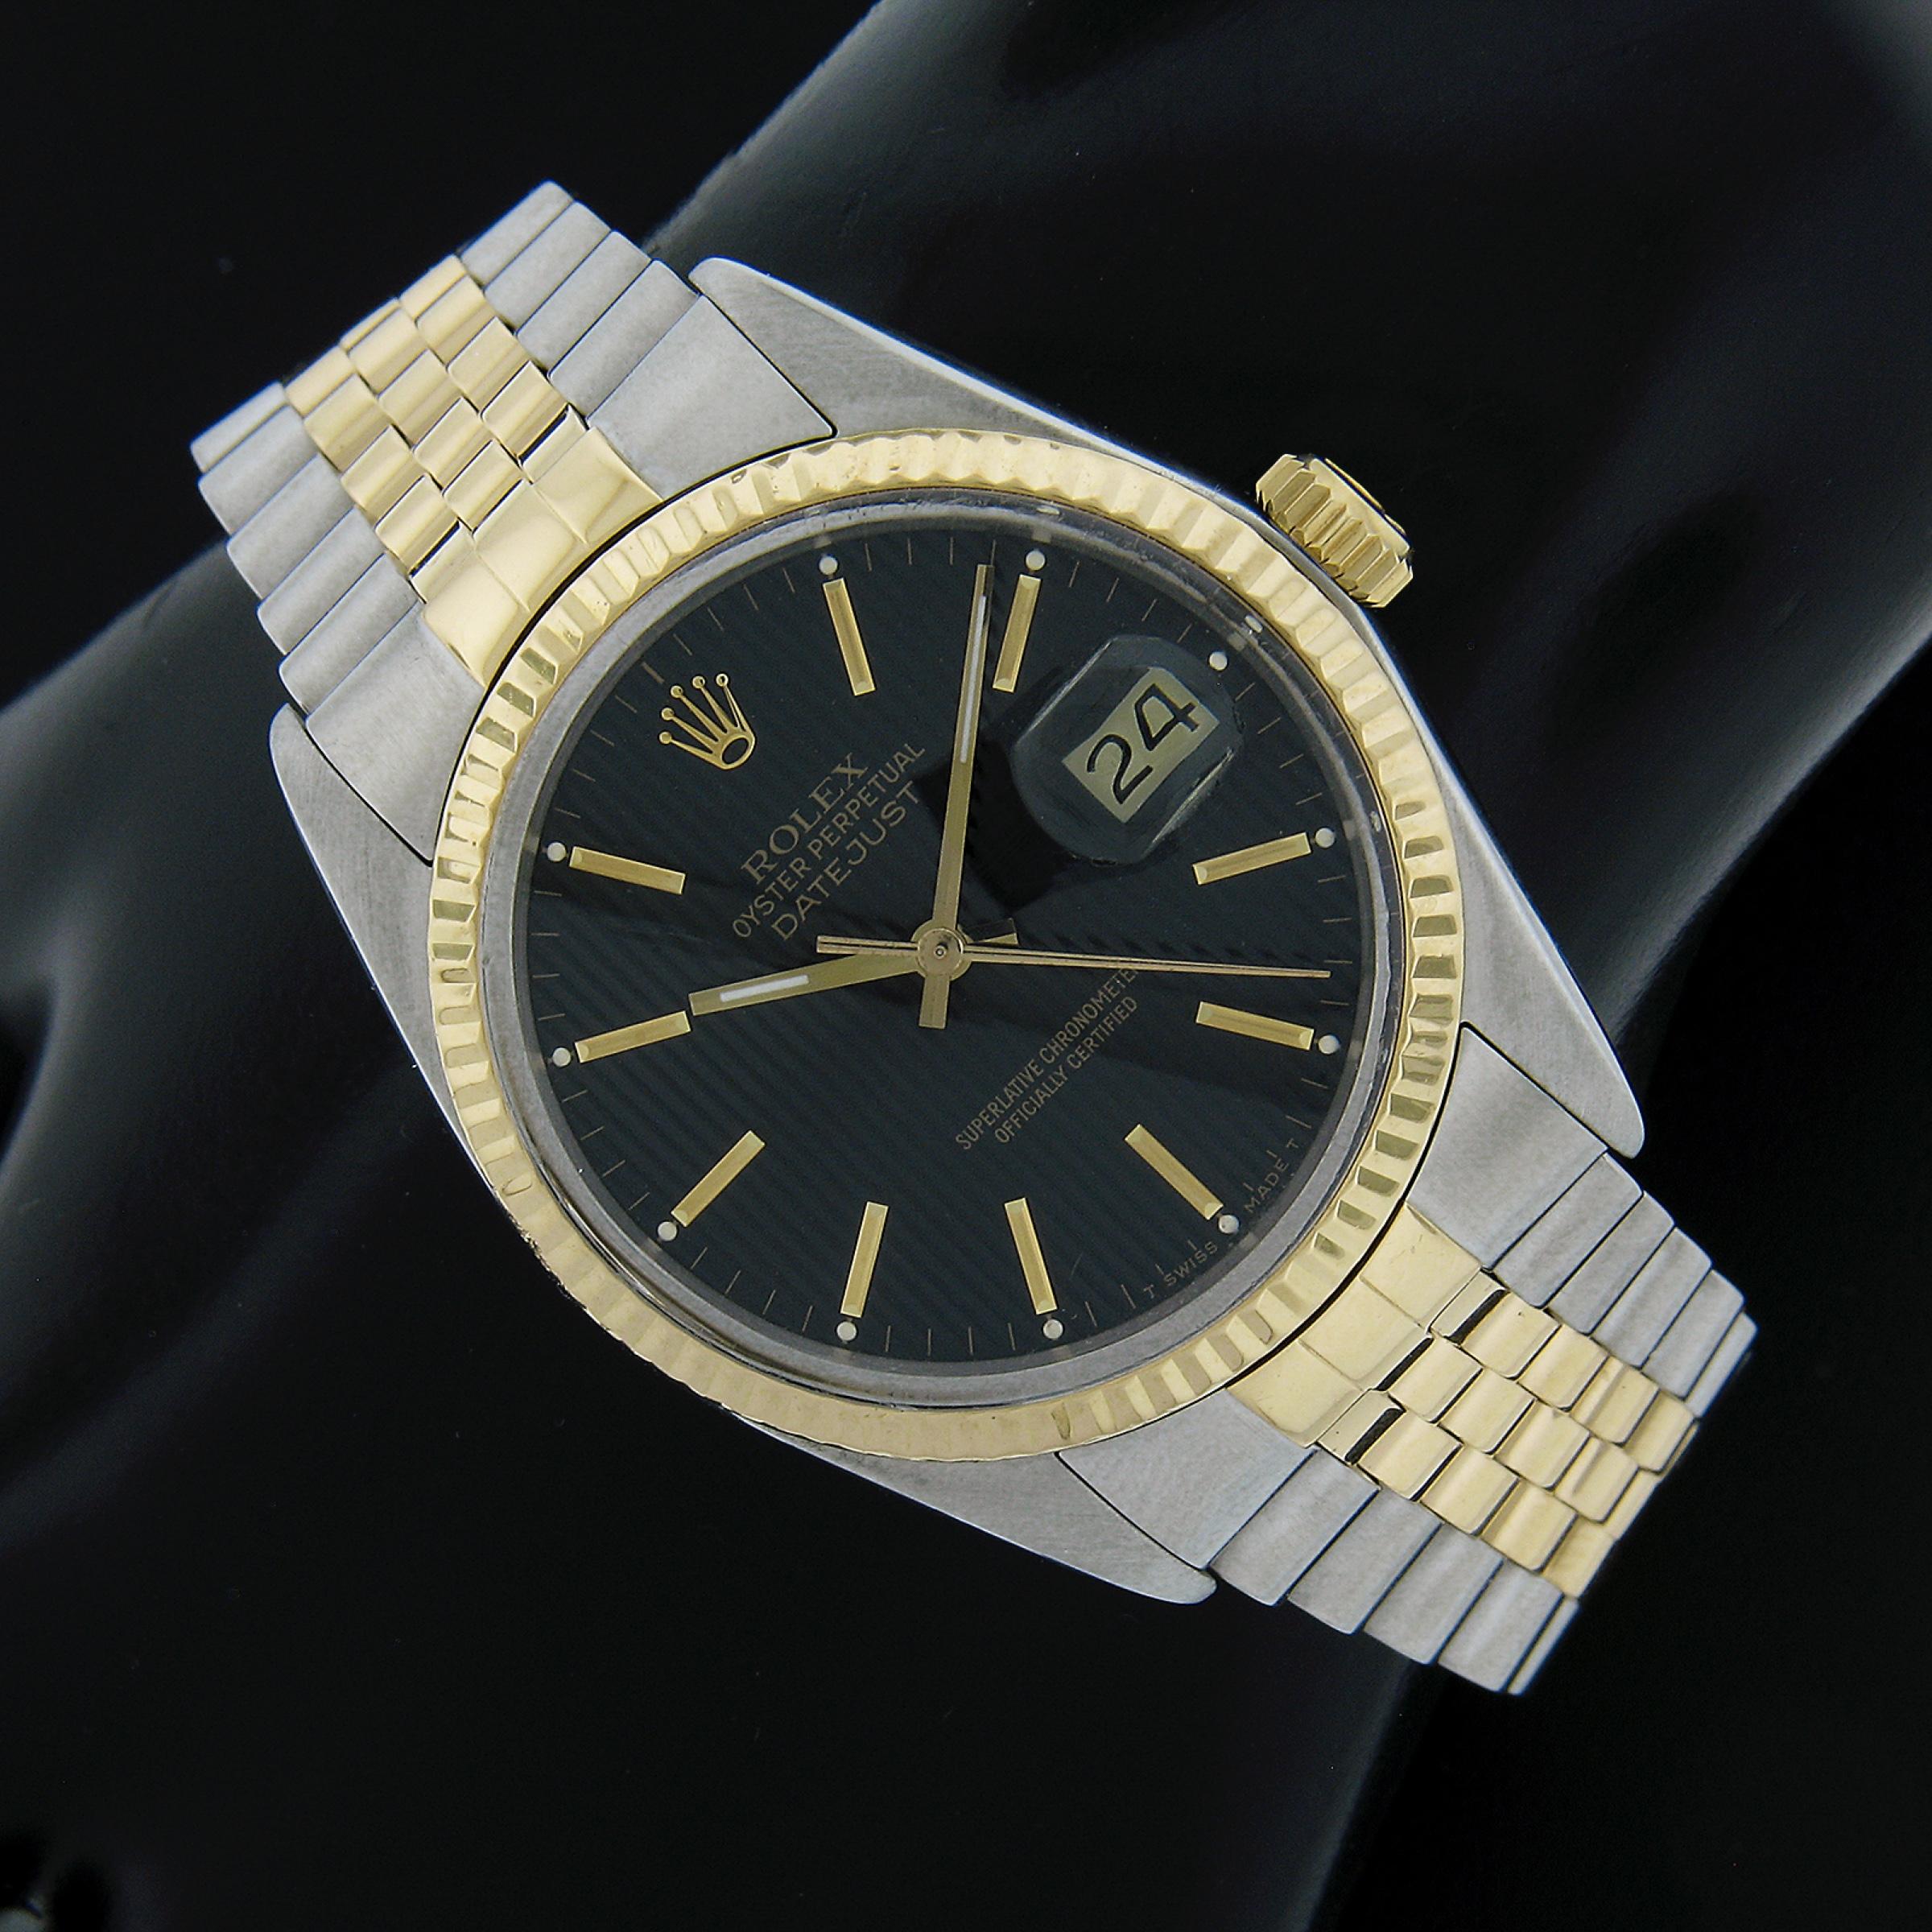 This forever classic unisex Rolex Datejust is from the year 1987 and reference 16013. The automatic self-winding movement runs smoothly and keeps accurate time, and the watch remains in excellent overall physical condition. The black tapestry dial